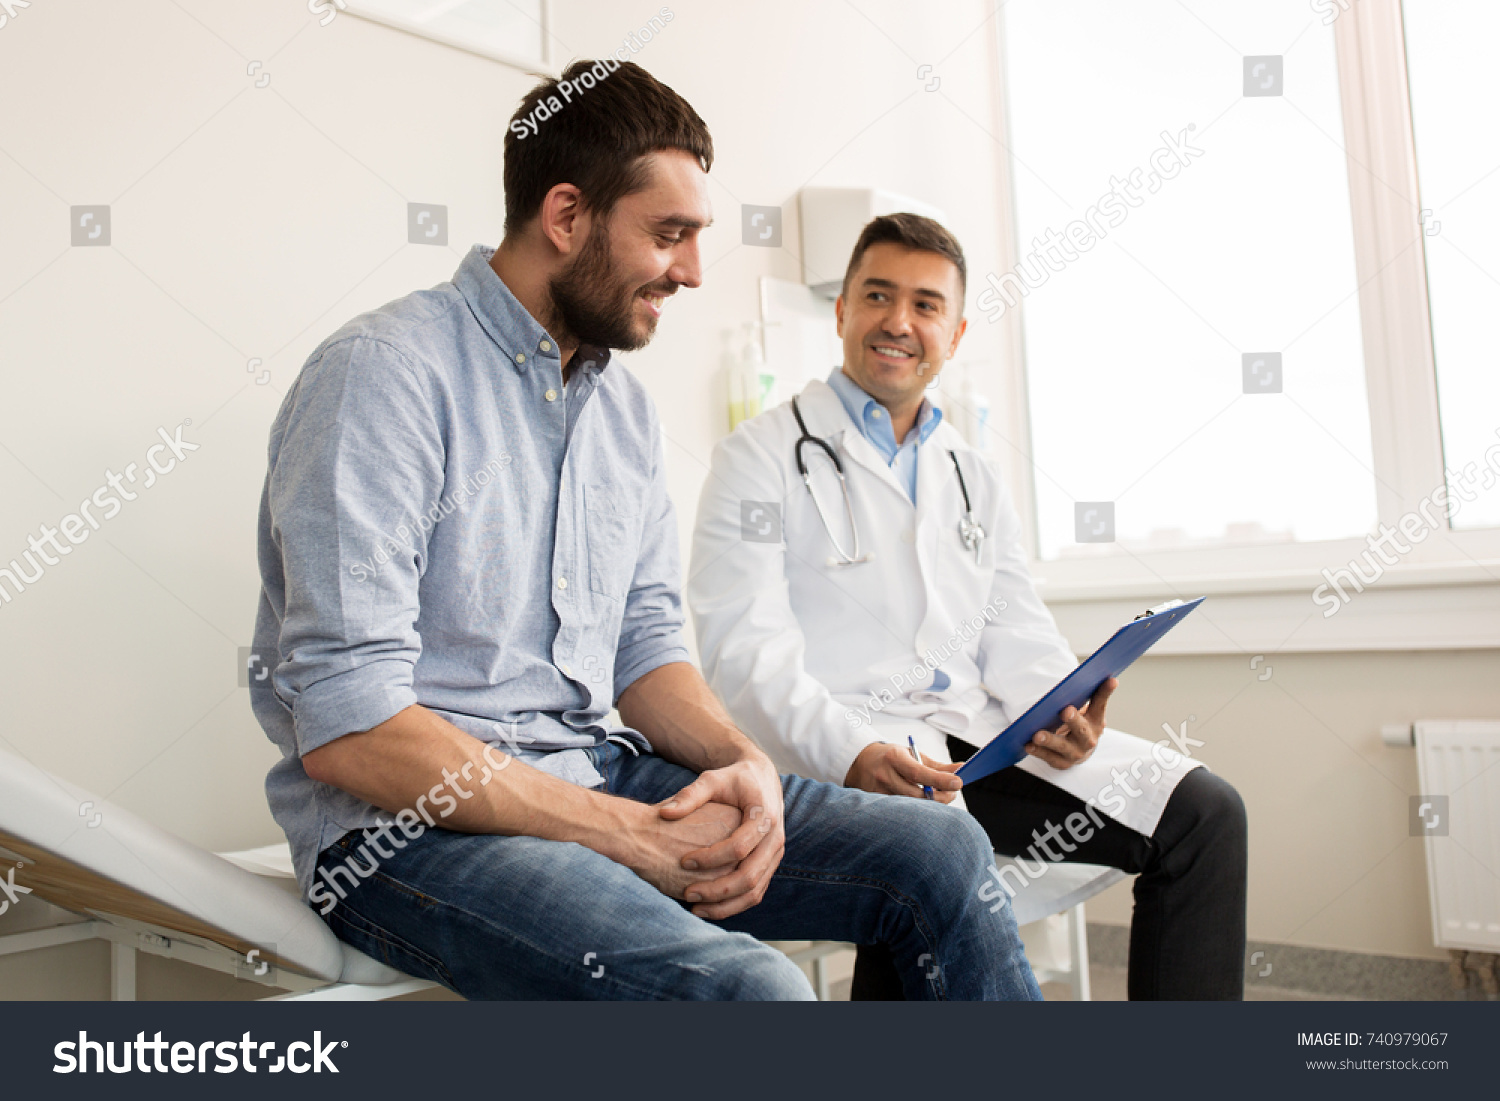 medicine, healthcare and people concept - smiling doctor with clipboard and young man patient meeting at hospital #740979067